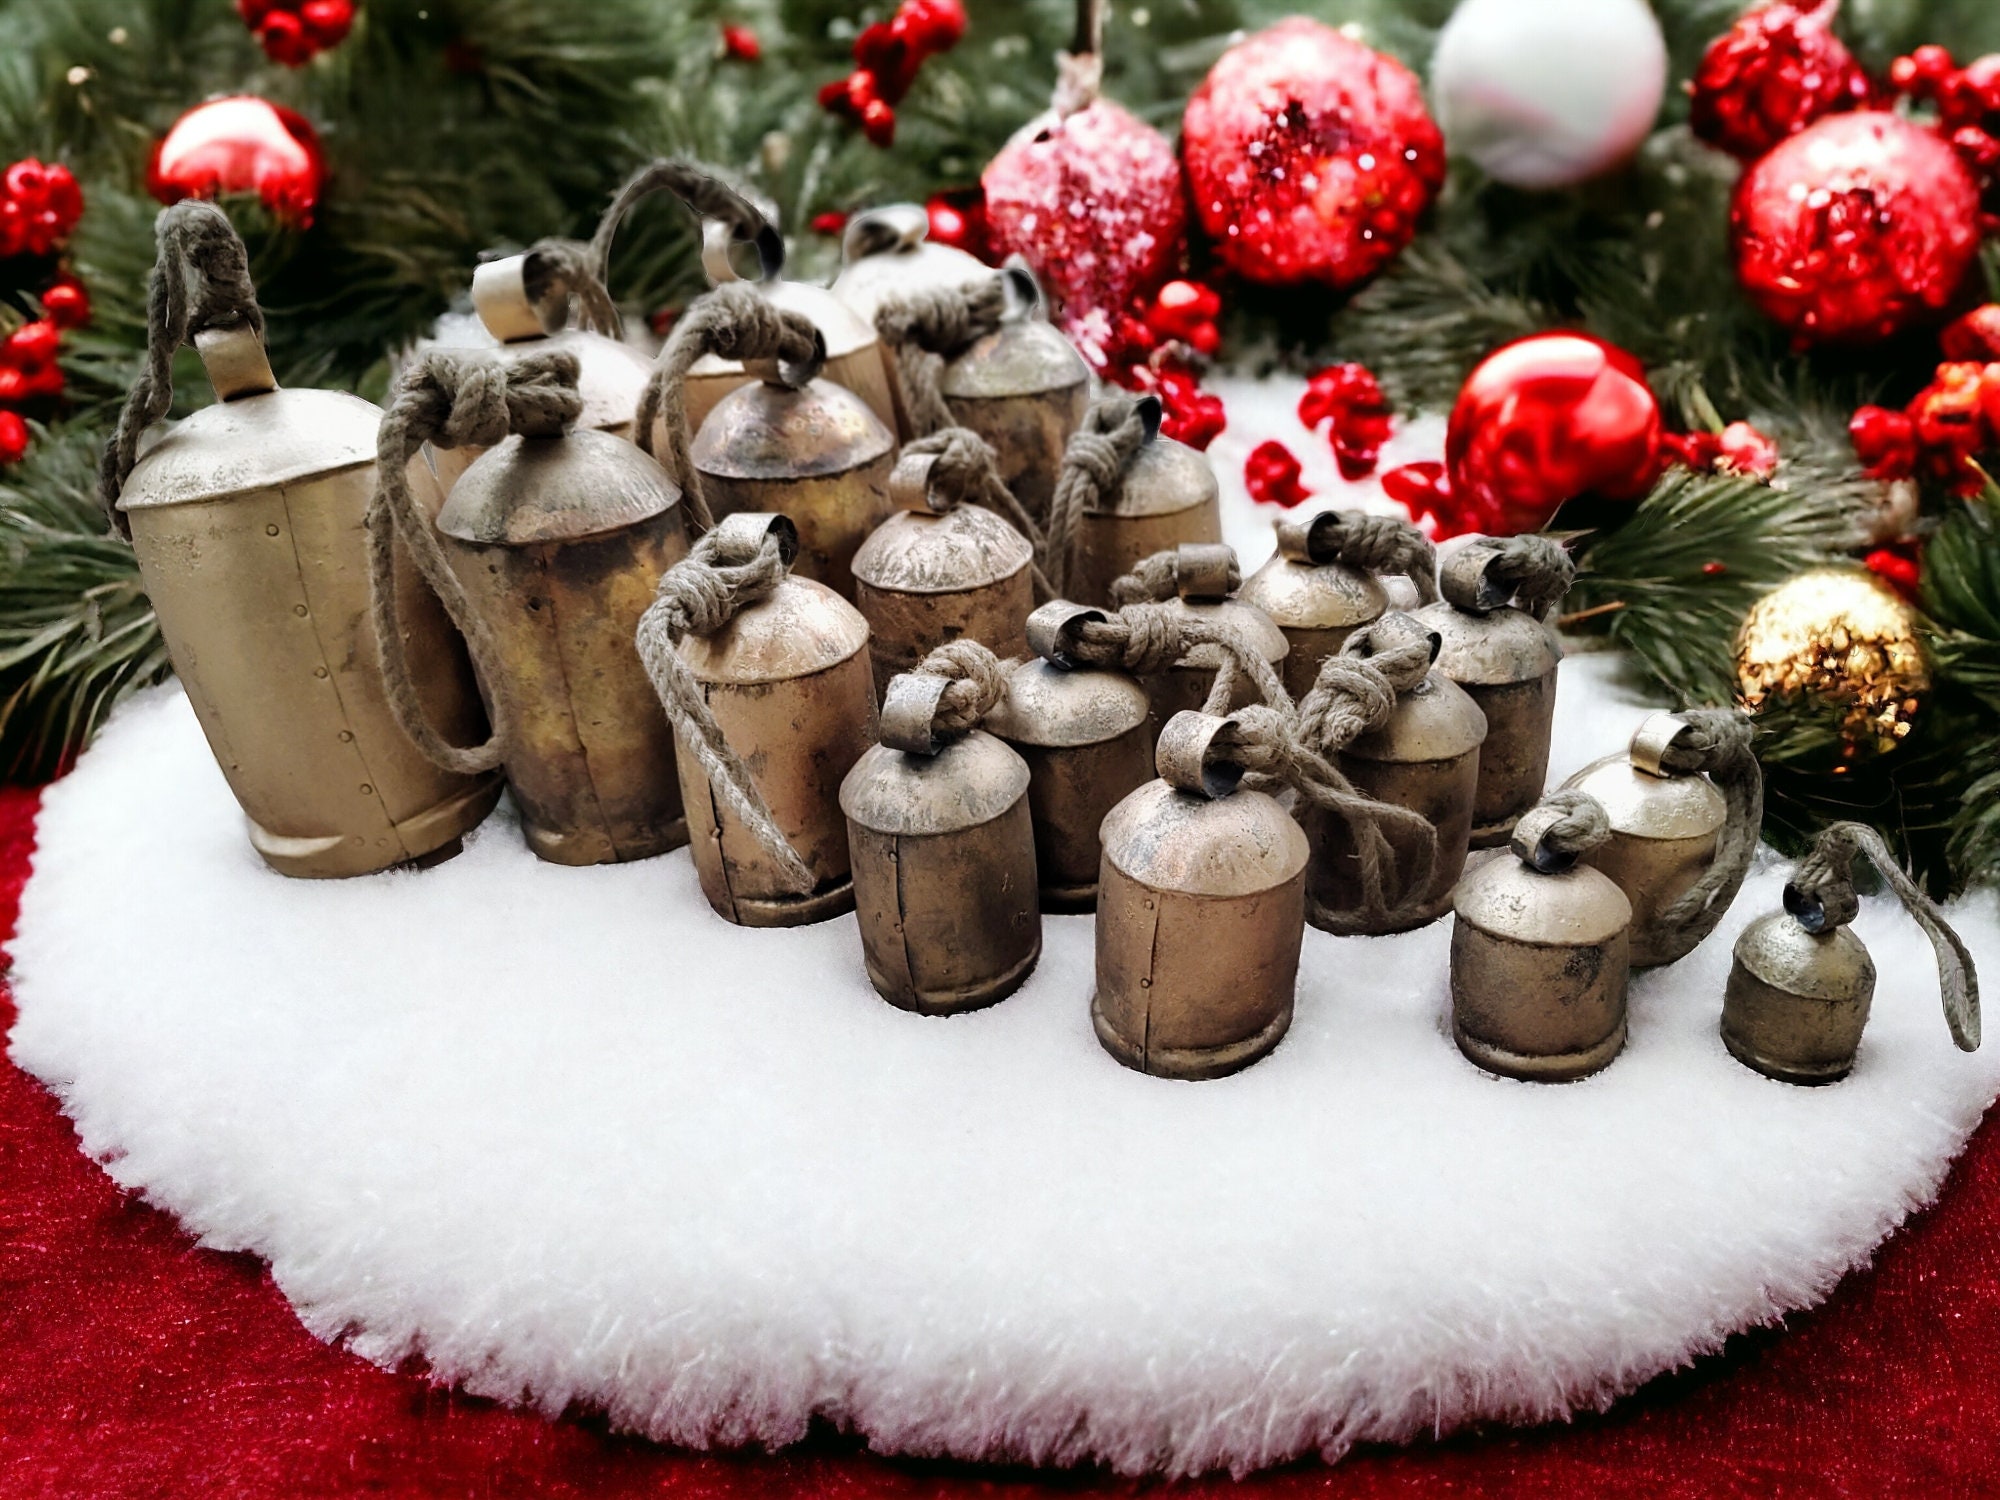 Akatva Large Vintage Gold Cow Bells for Rustic Christmas Decor - Set of 4 Bells on Rope